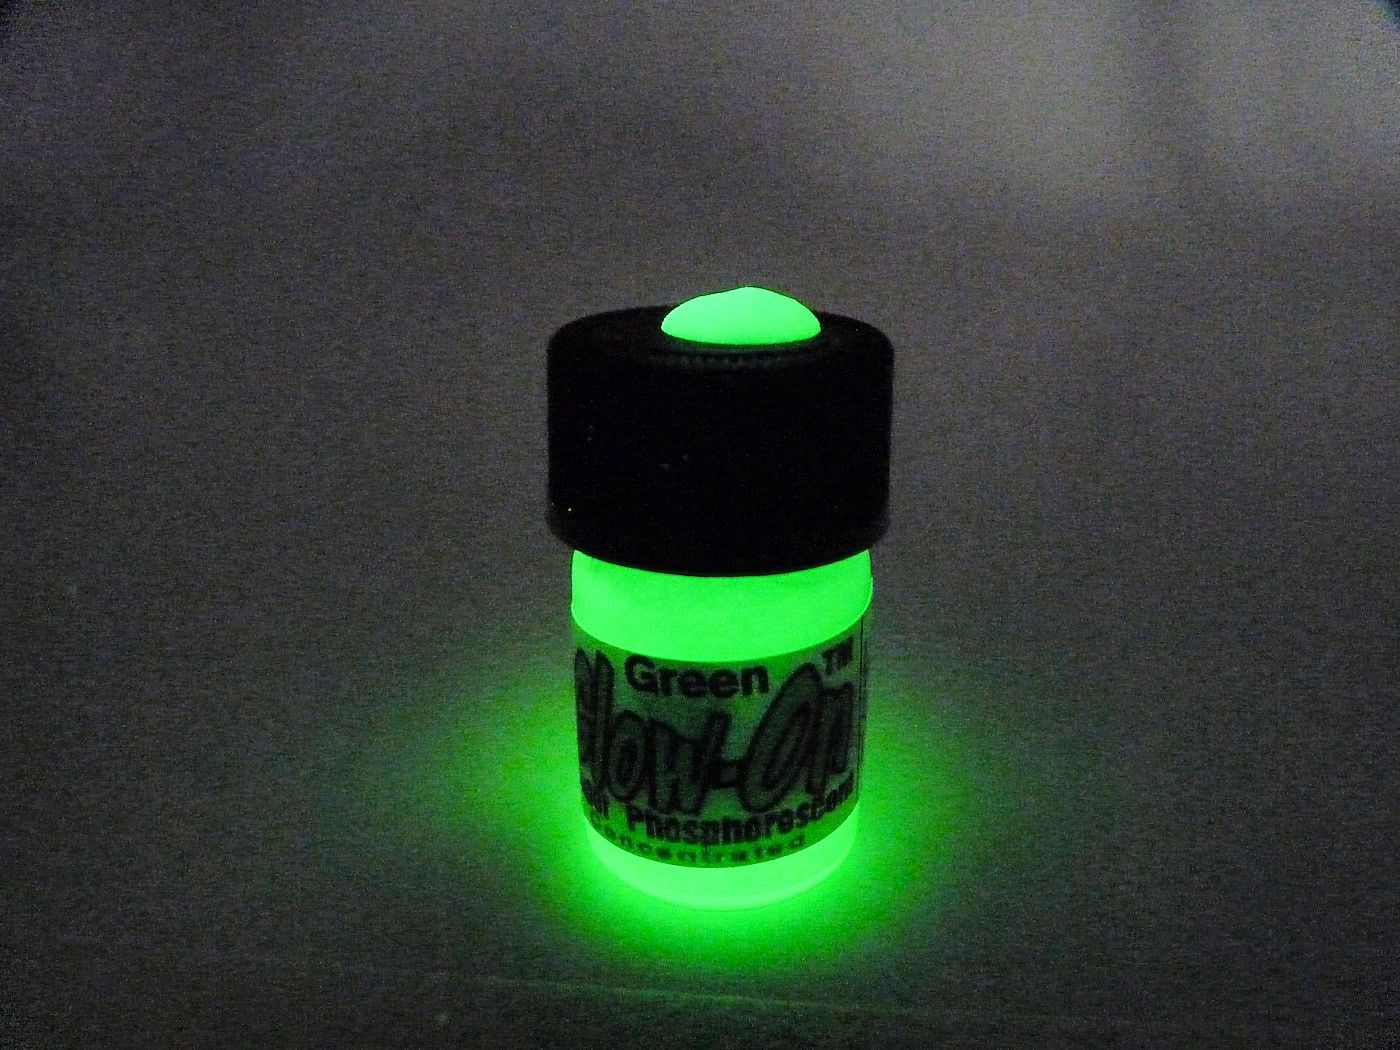  GLOW-ON SUPER PHOSPHORESCENT, Aqua Glow and White Day Color,  Gun Night Sights Paint. Medium Size 4.6 ml vial. Concentrated, Bright Long  Lasting Glow. : Sports & Outdoors